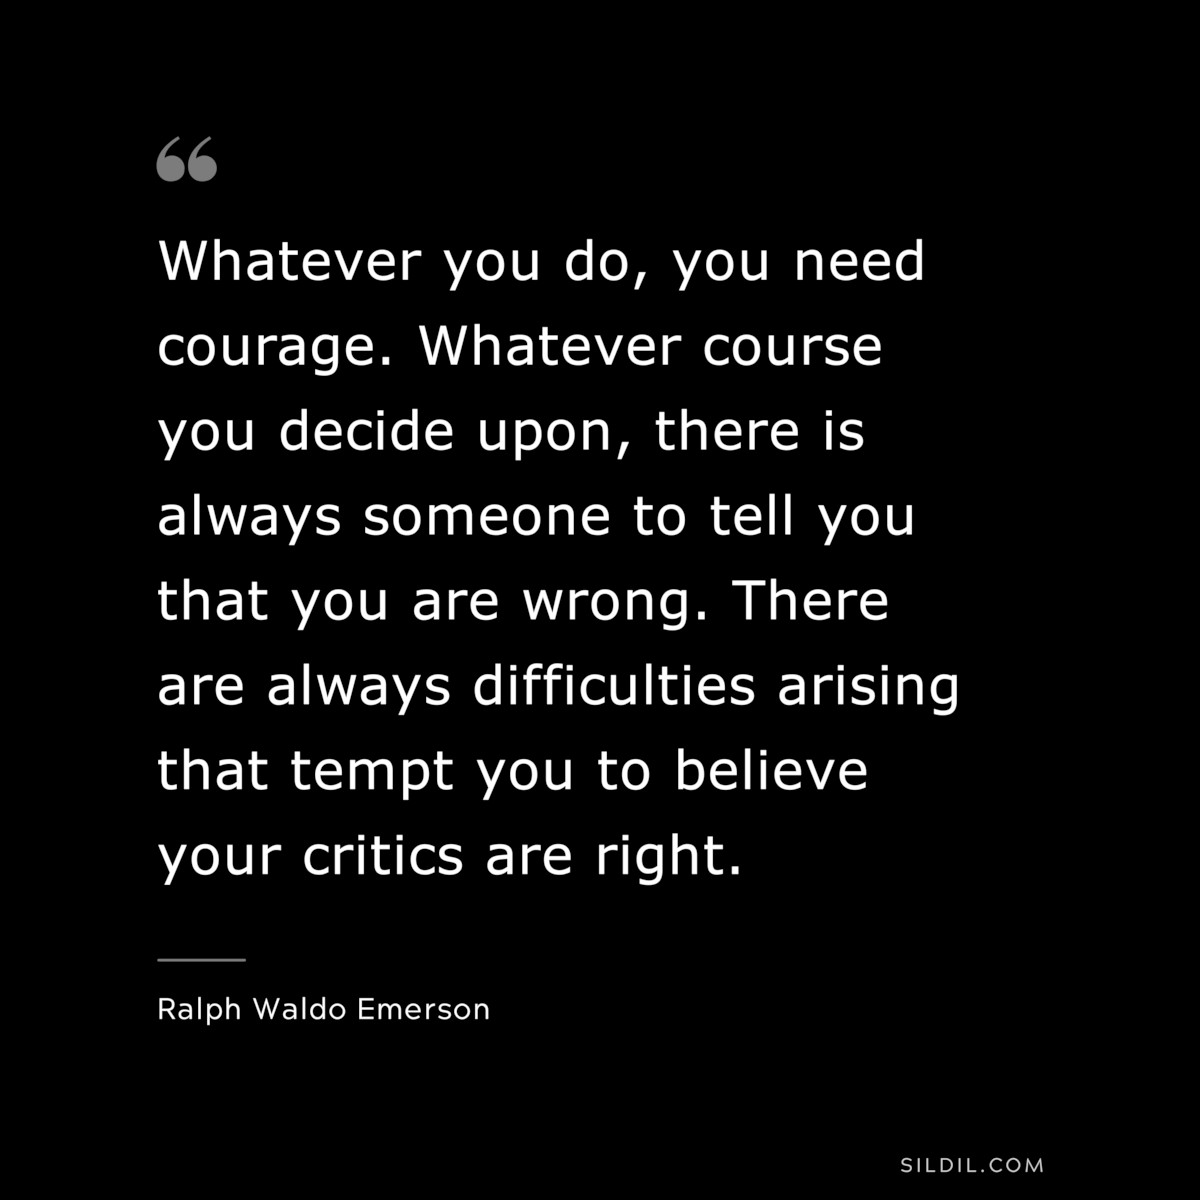 Whatever you do, you need courage. Whatever course you decide upon, there is always someone to tell you that you are wrong. There are always difficulties arising that tempt you to believe your critics are right. ― Ralph Waldo Emerson